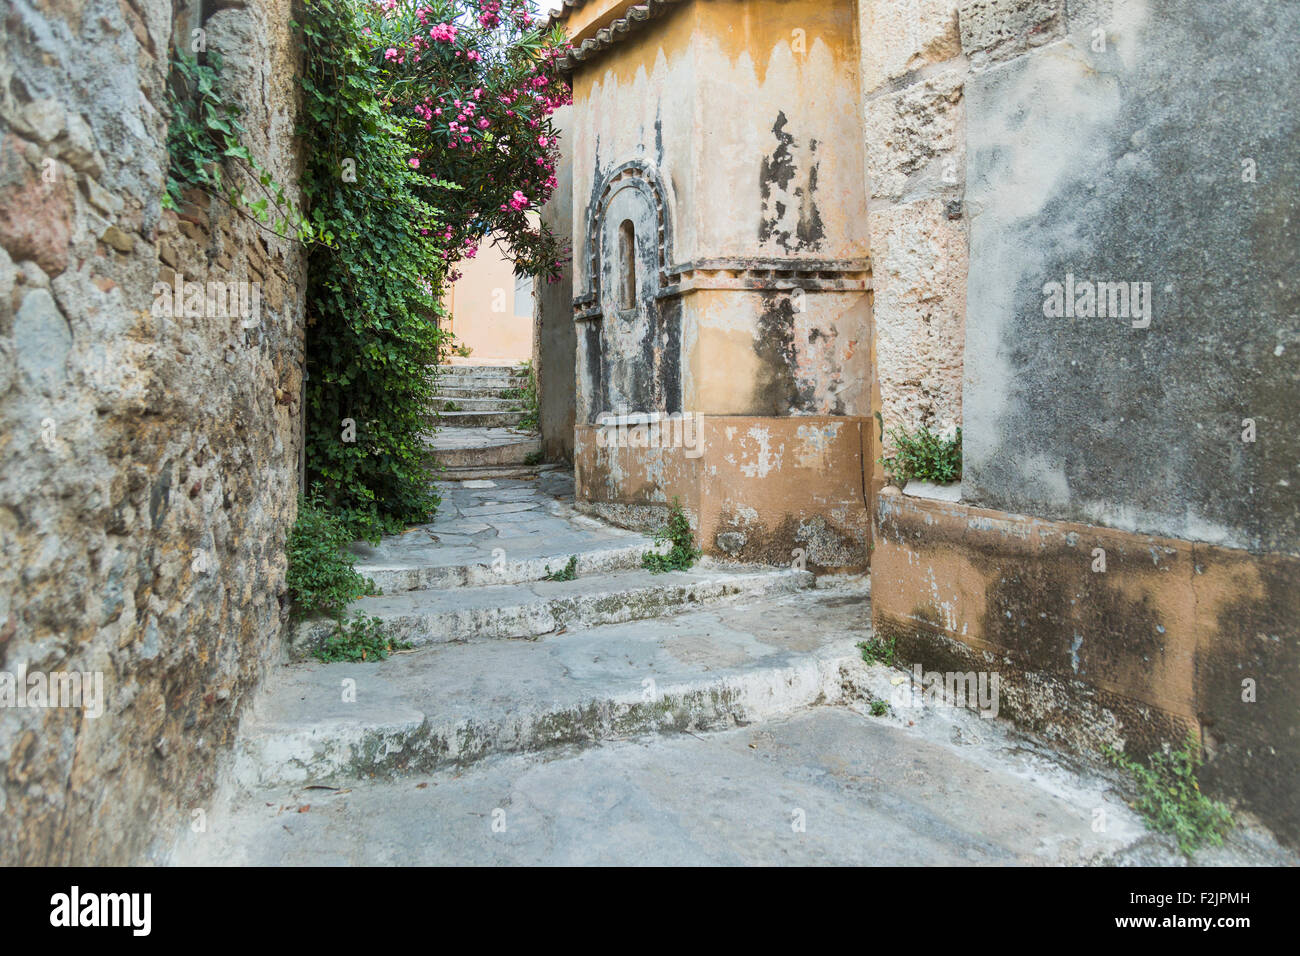 Old stone pathway with bougainvillea growing on side of buidling in Plaka Athens Greece Stock Photo